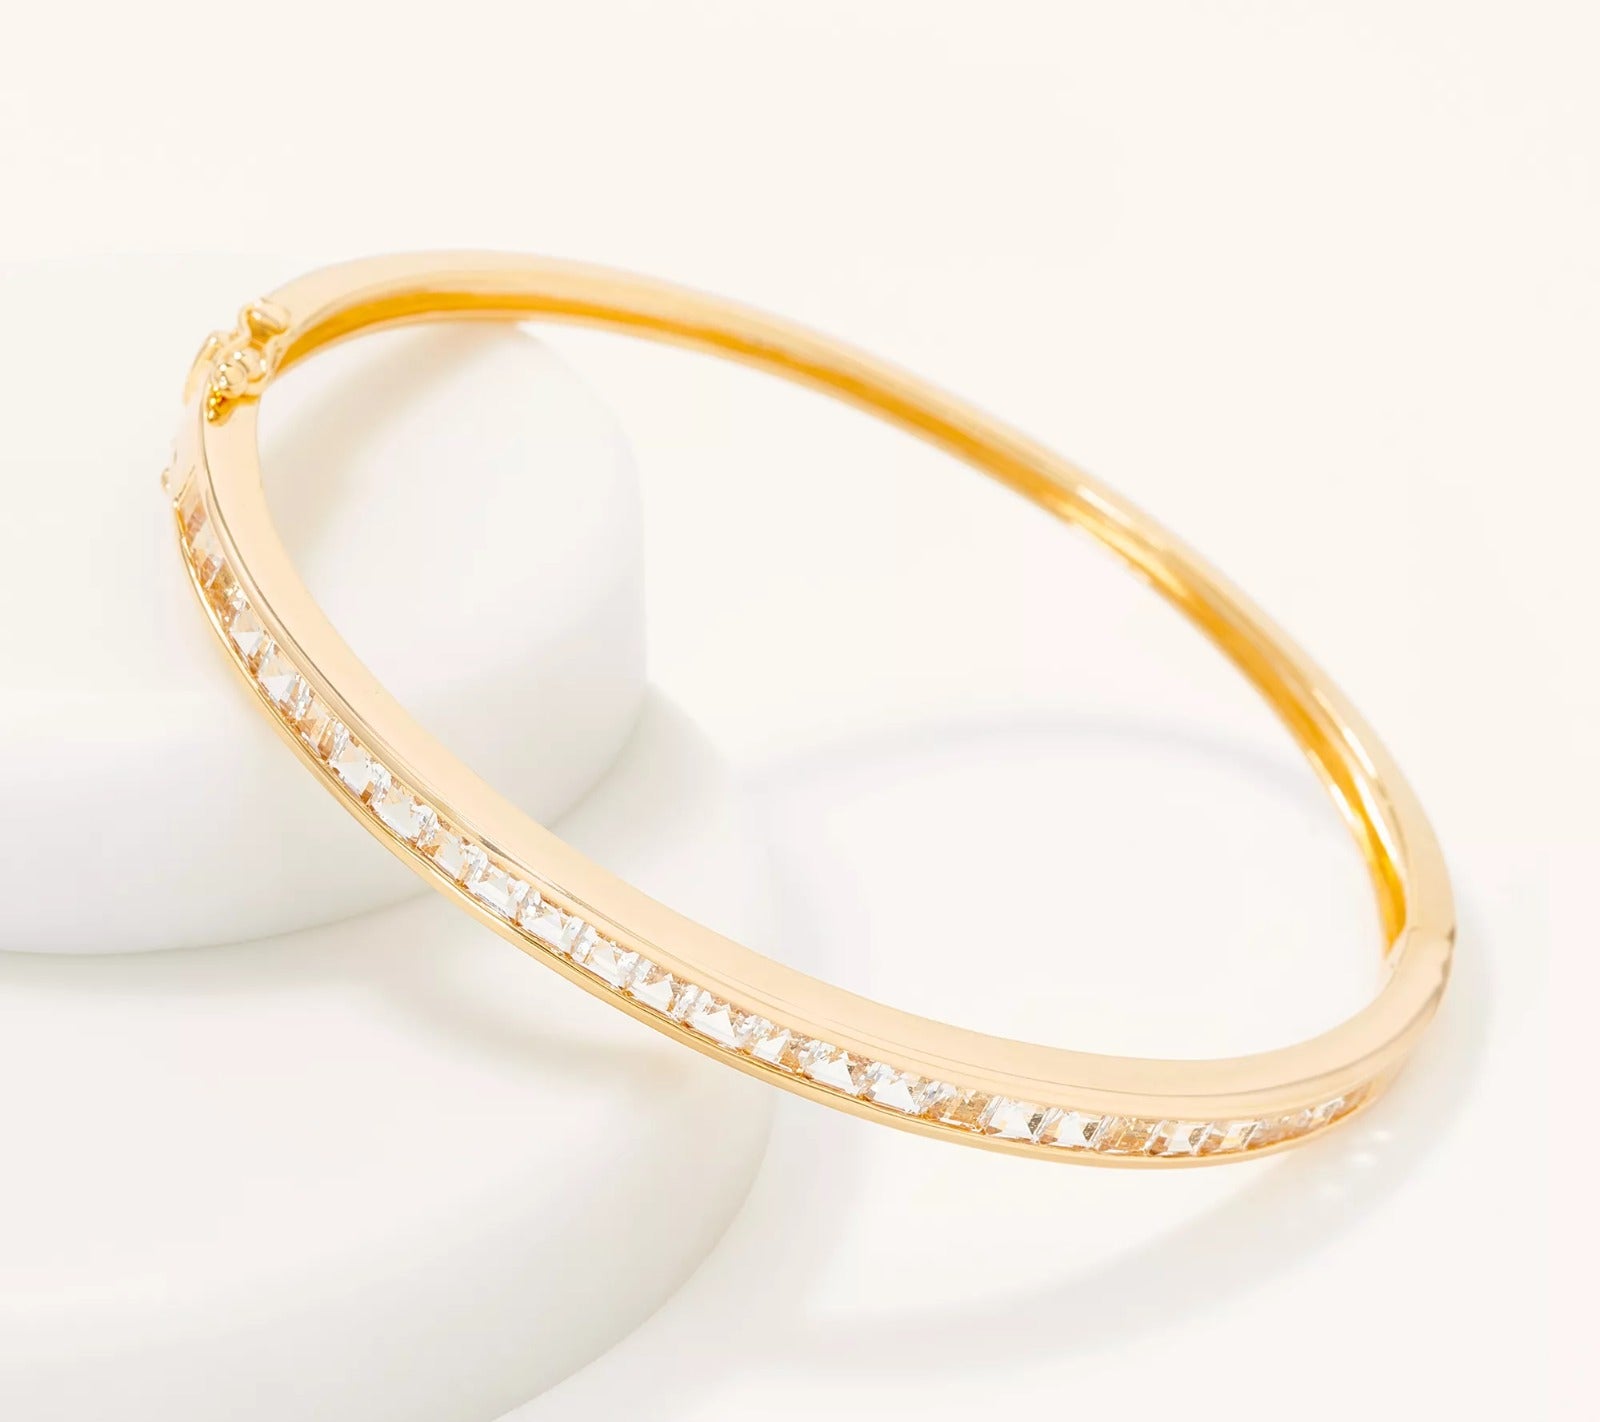 Affinity Gems Choice of Gem 14K Gold Plated Hinged Bangle, 2.85-3.60 cttw, 6-3/4